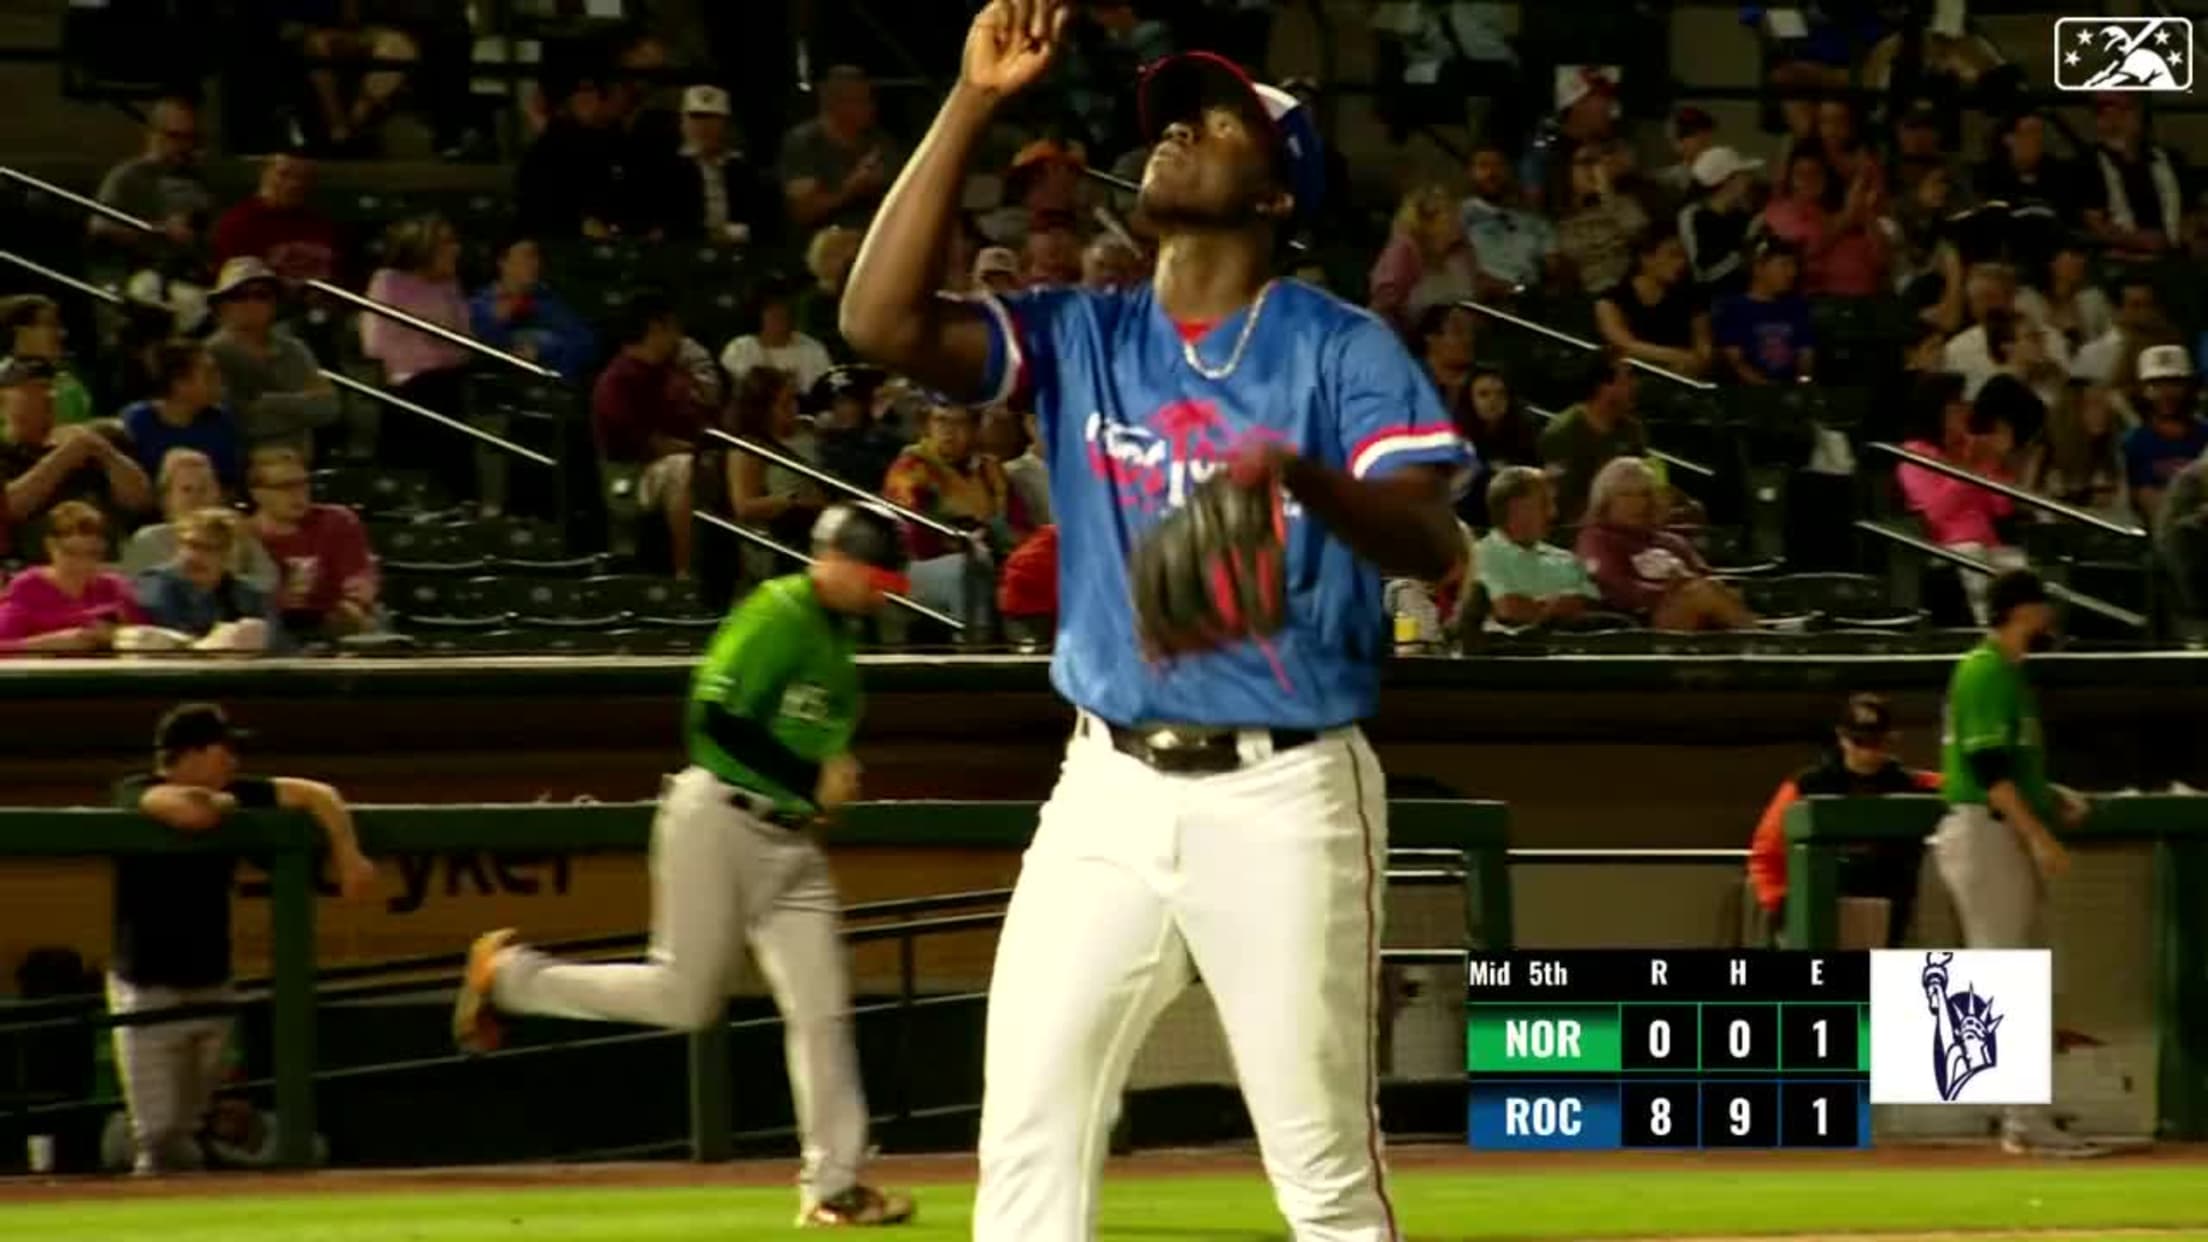 Franklyn Kilome strikes out eight